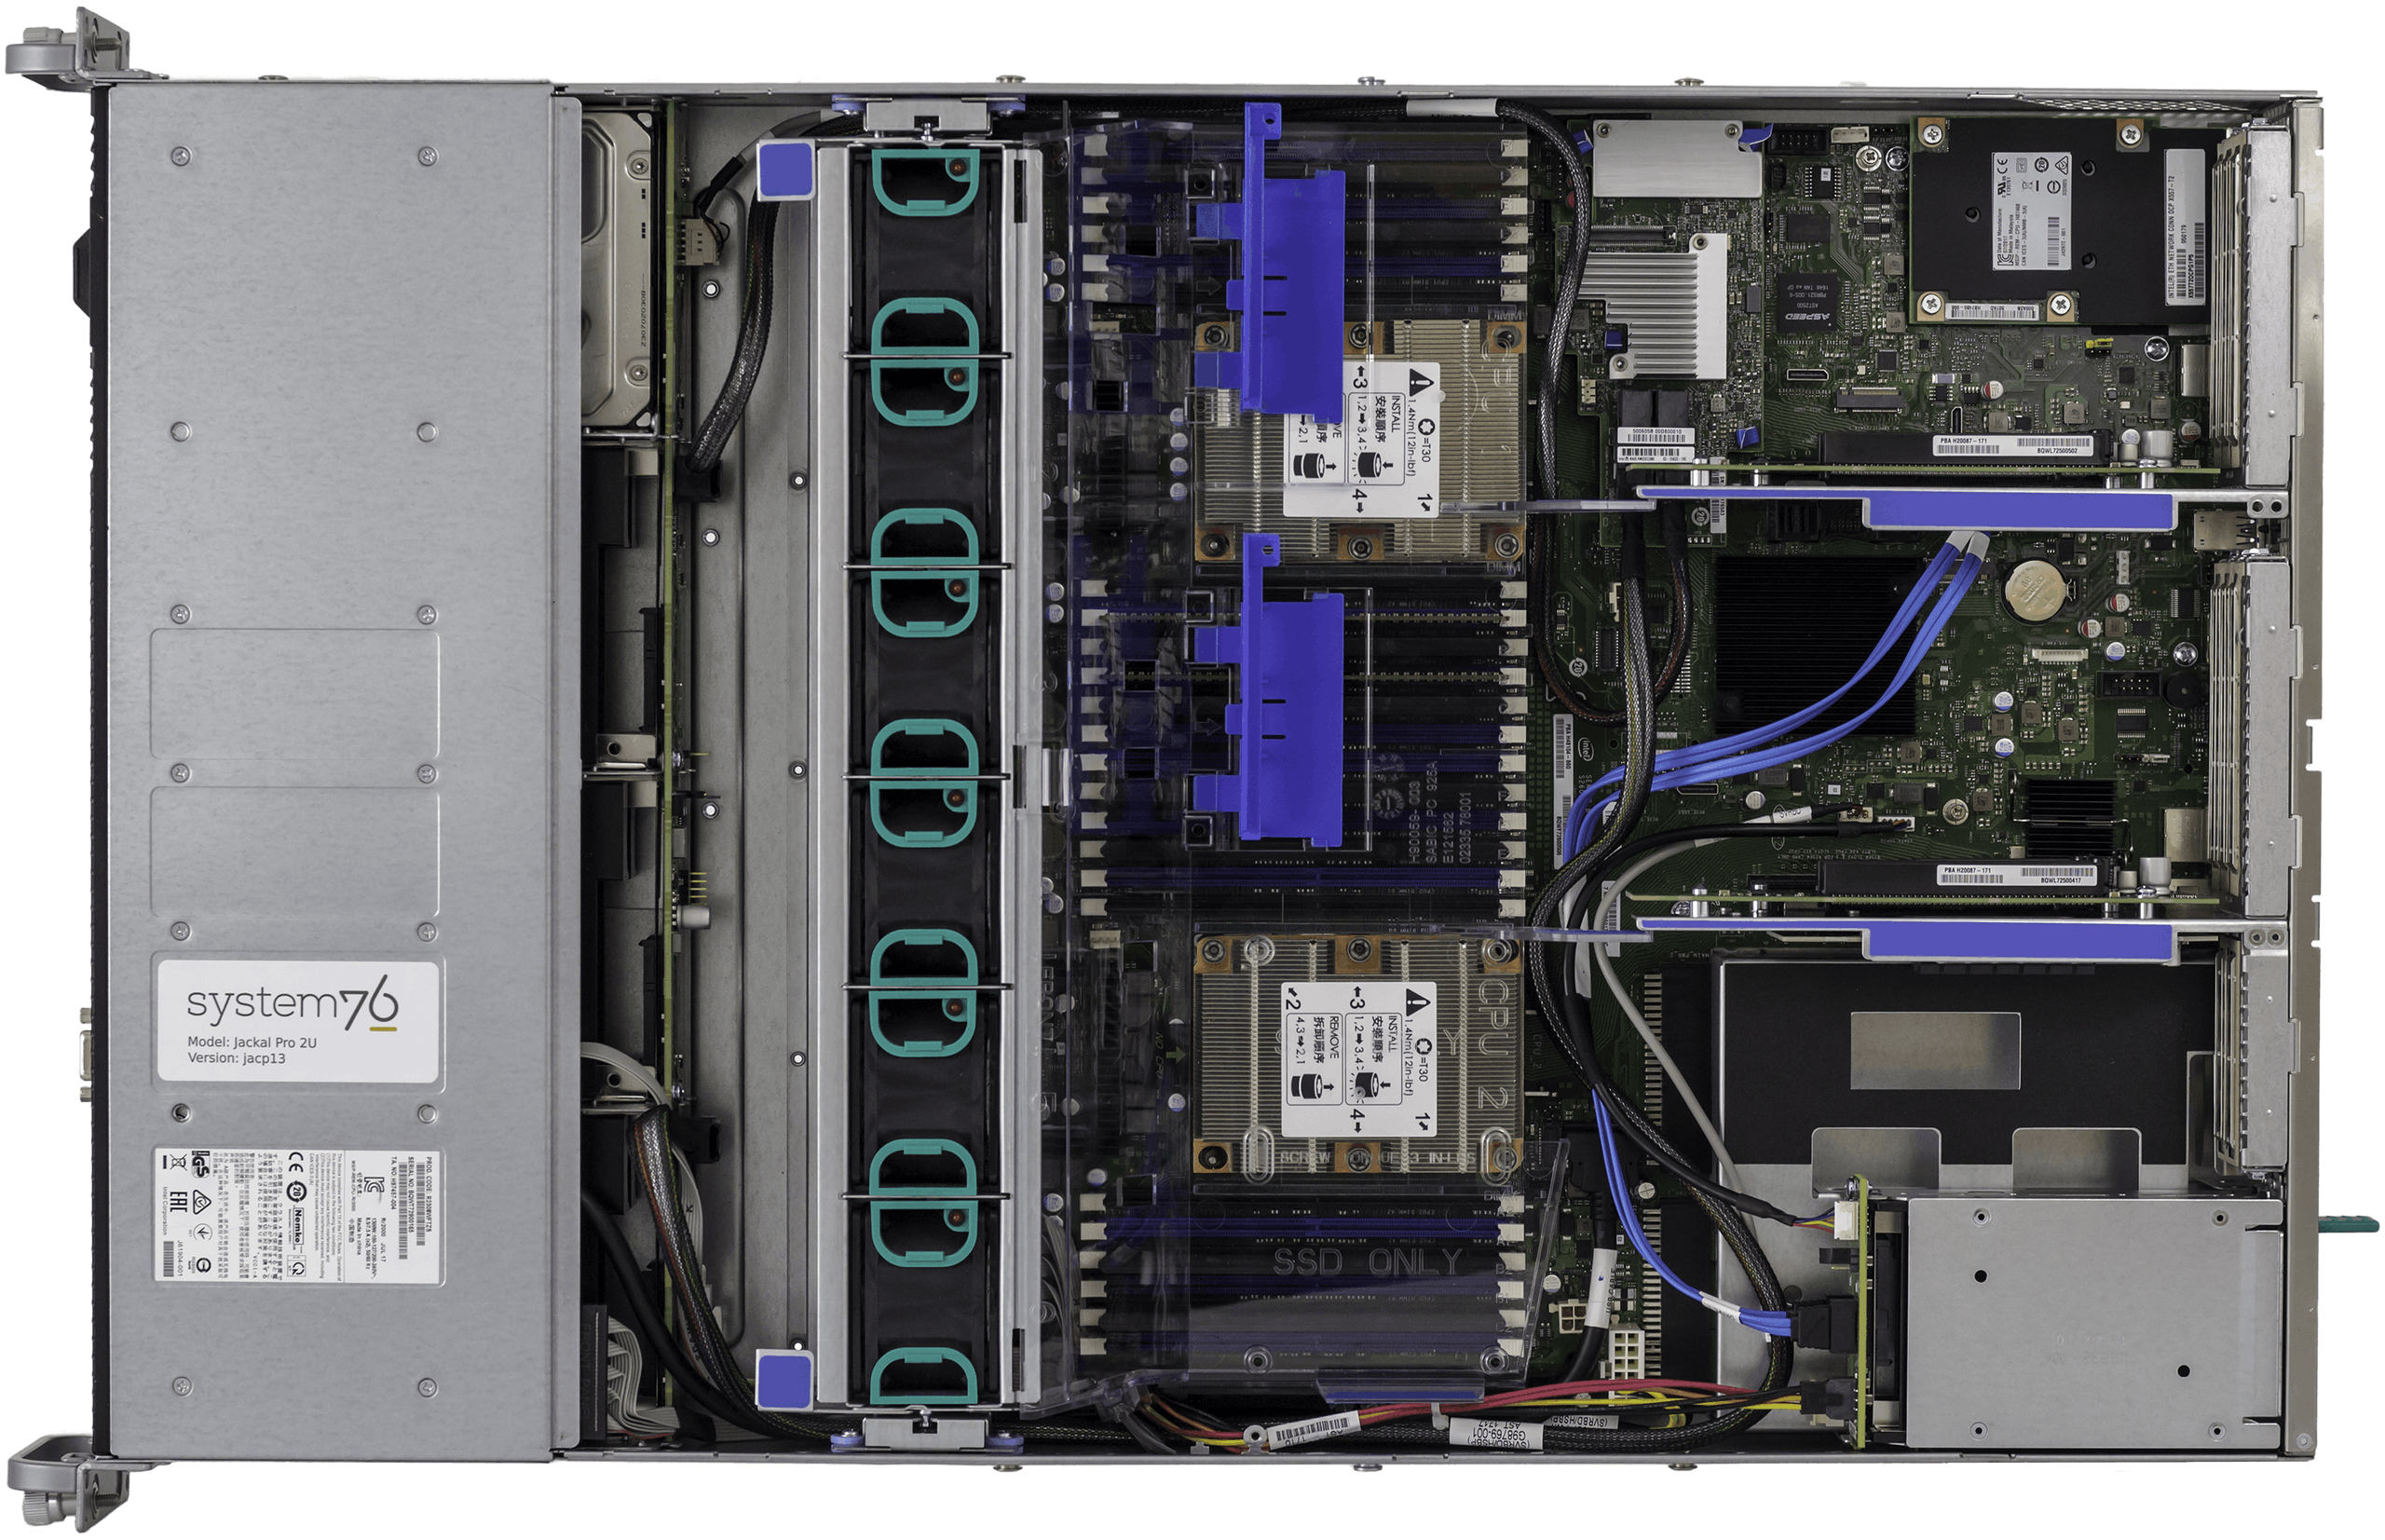 The inner workings of the Jackal Pro 2U, with all hardware exposed.